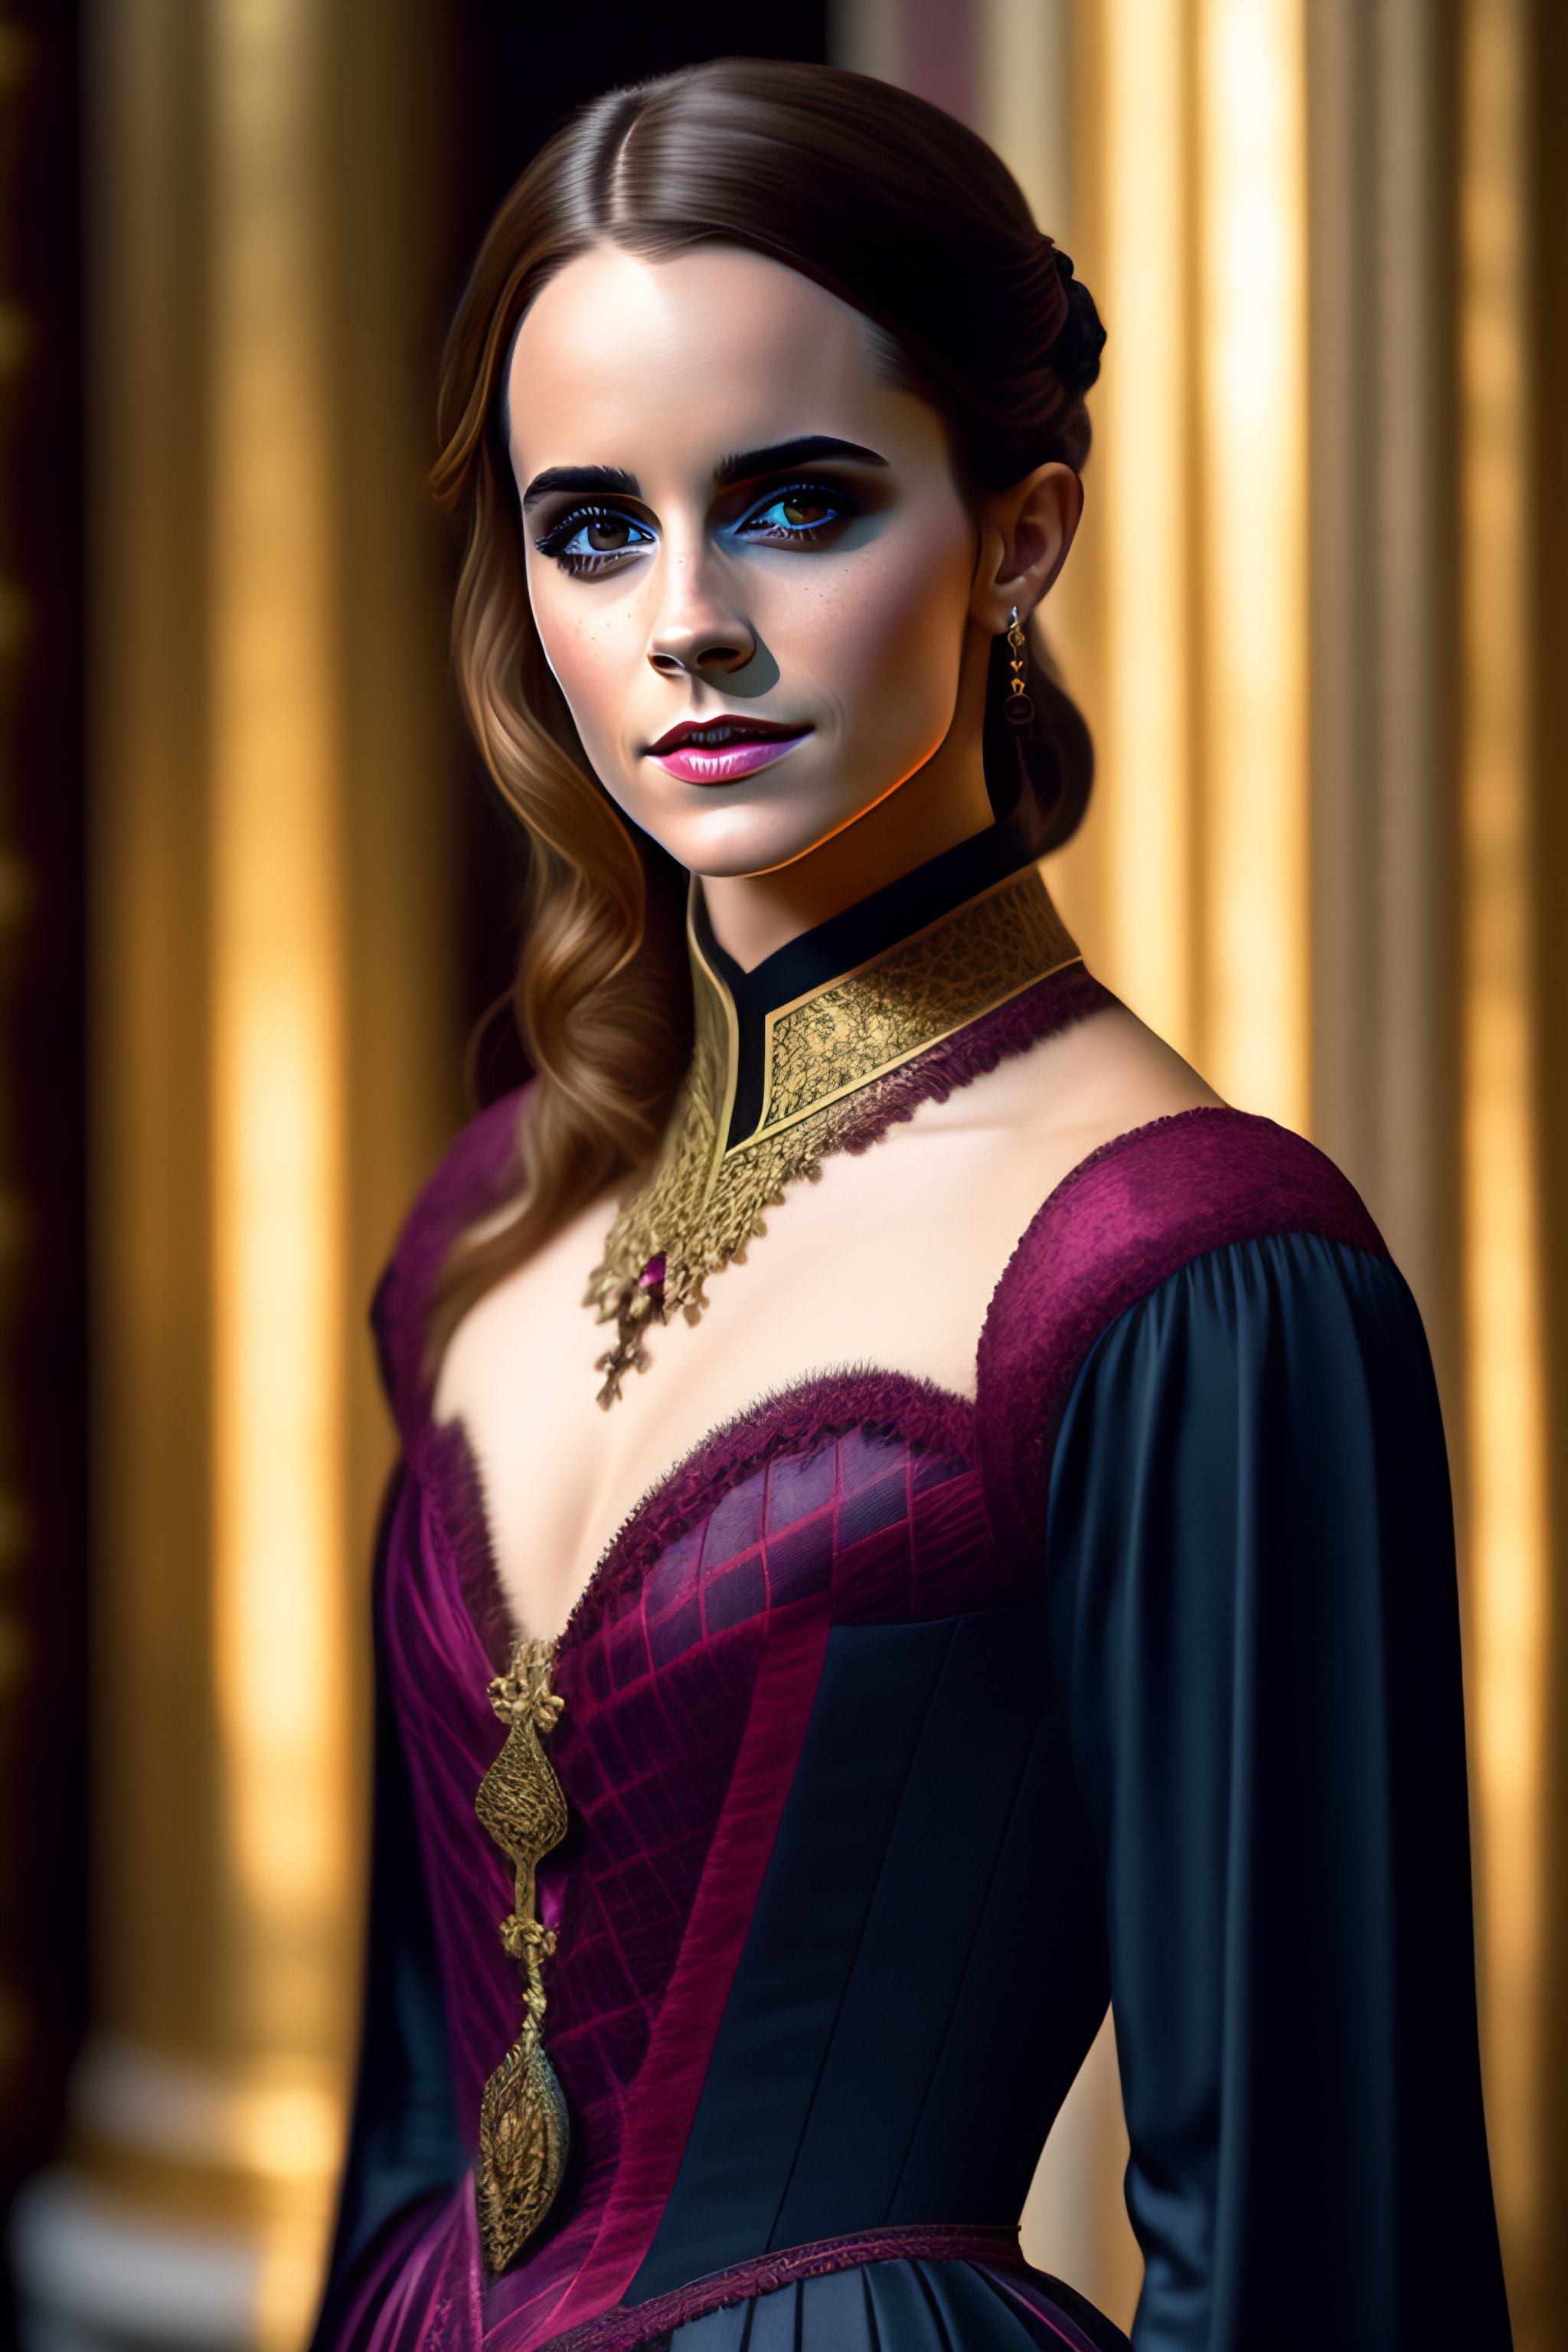 Lexica - An incredibly beautiful gothic Emma Watson in the palace ...